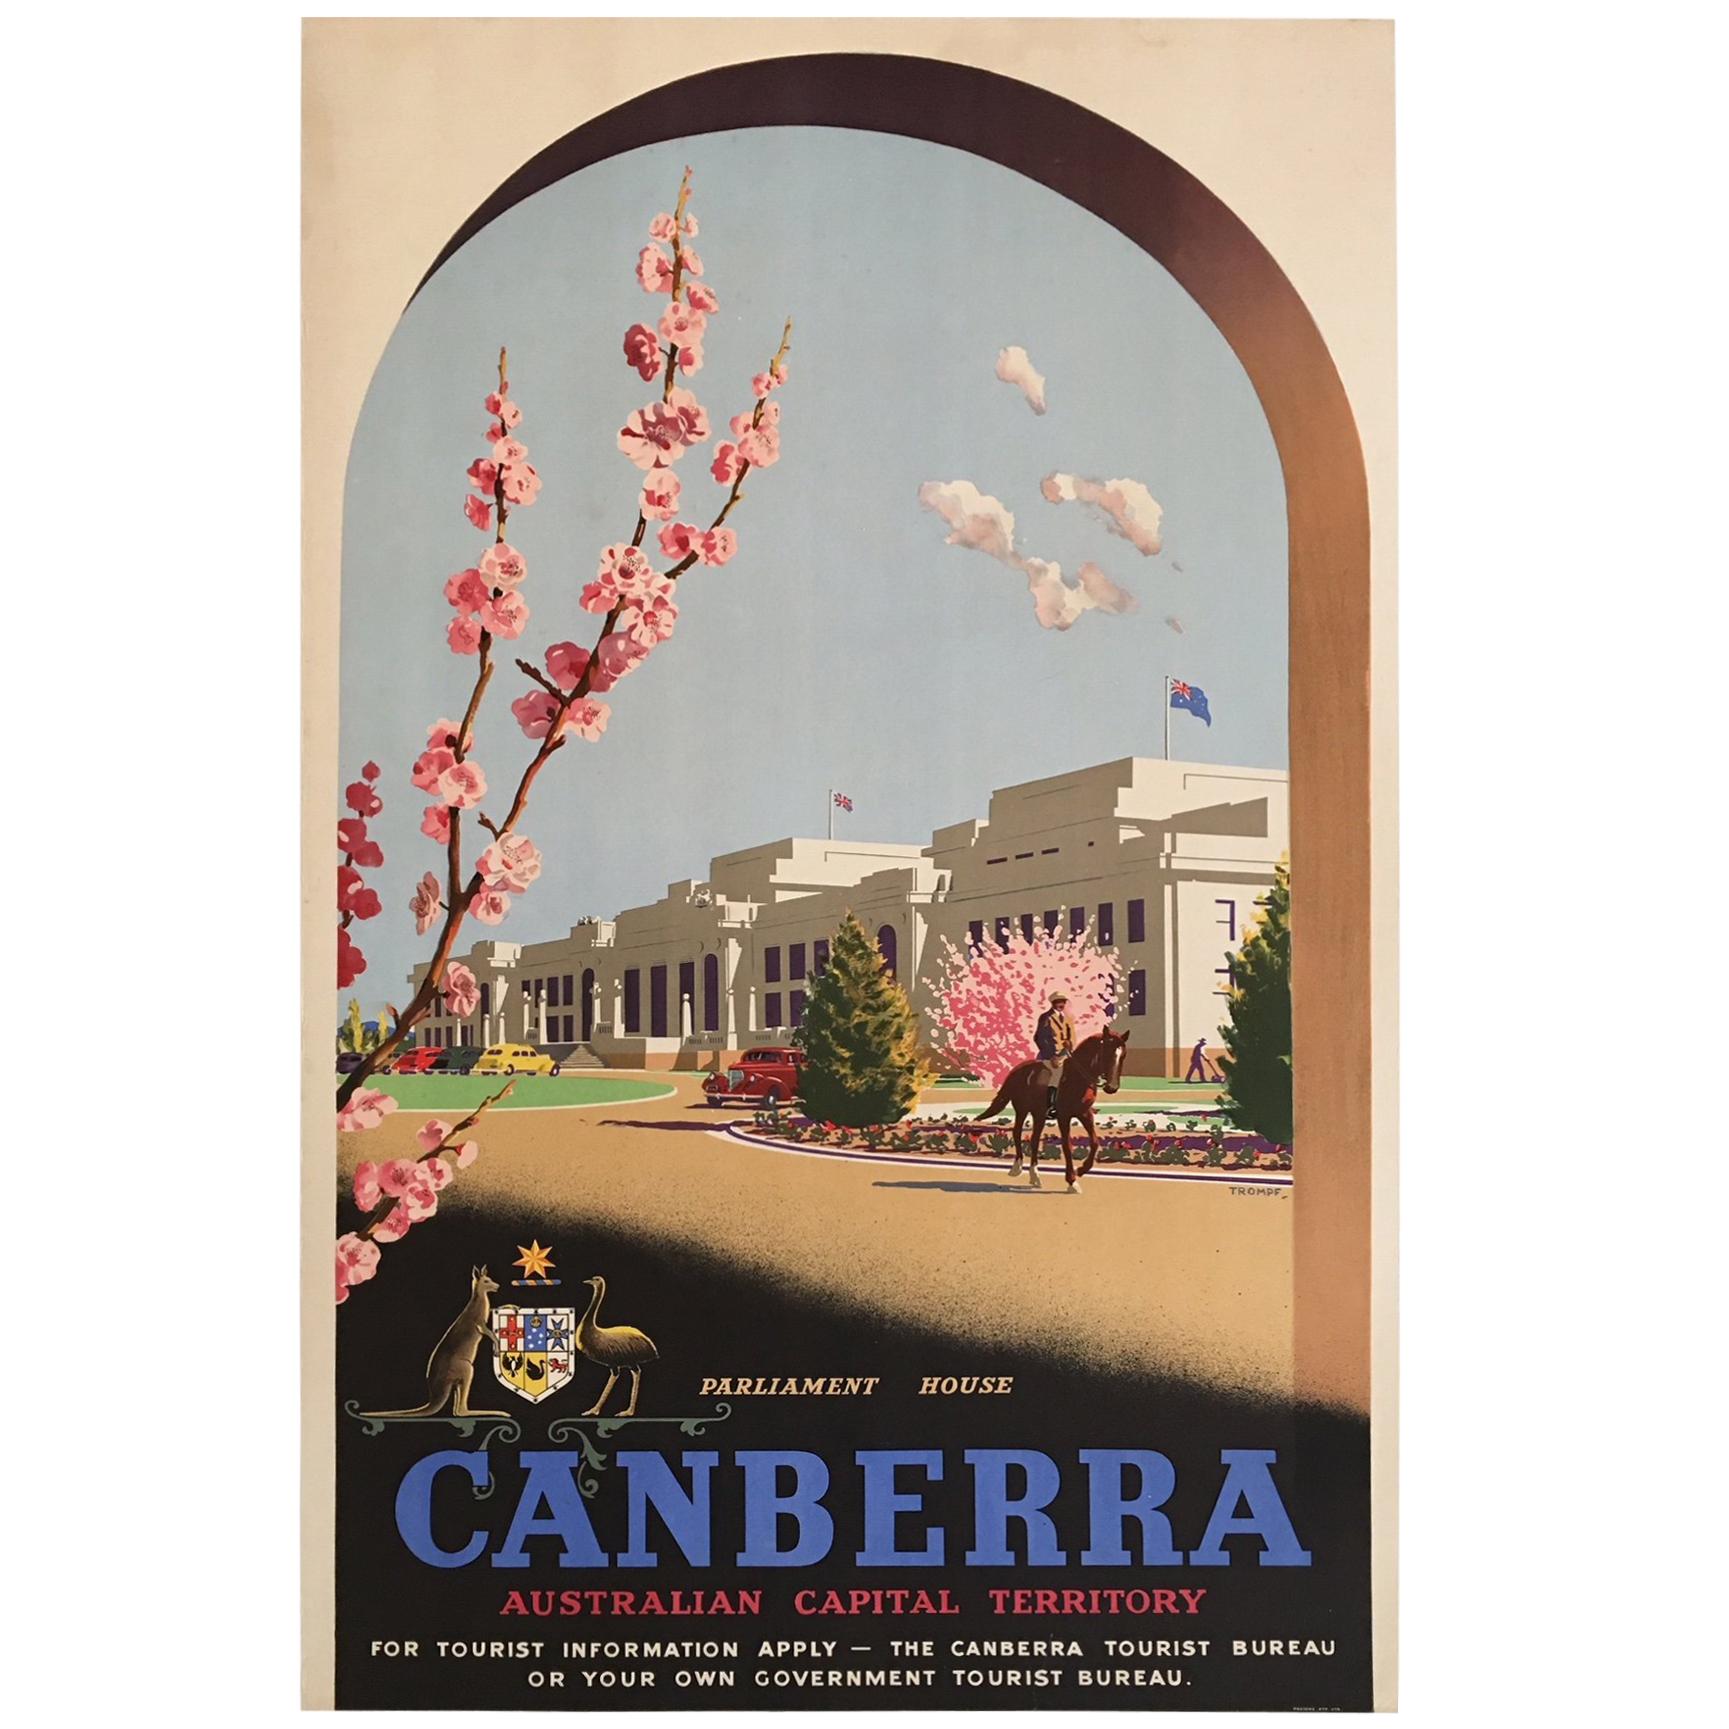 Original Vintage Poster, Canberra Australian Capital Territory by Trompf, 1930